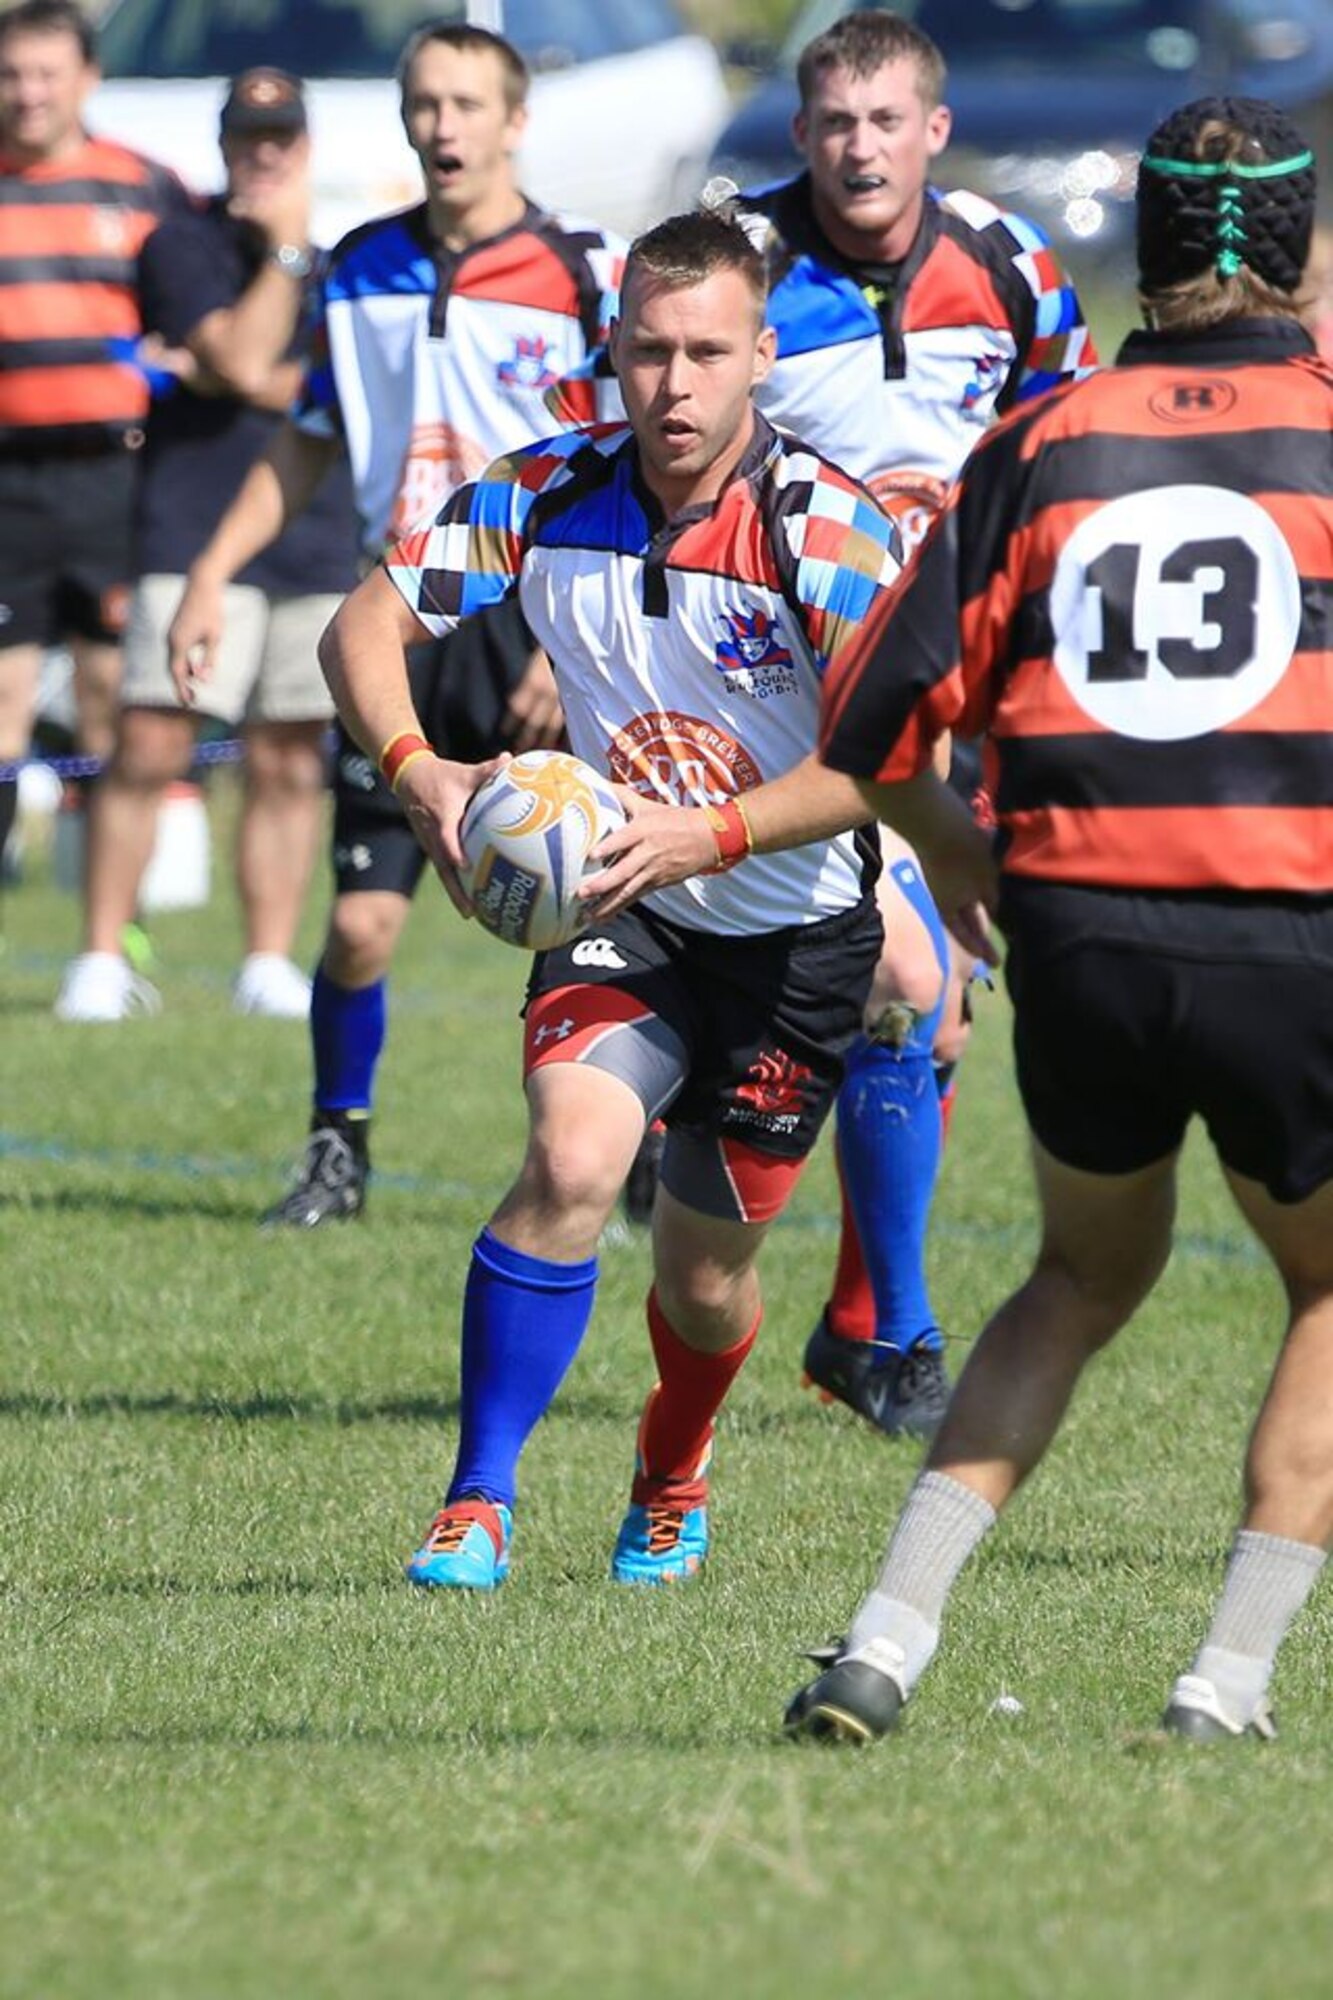 Senior Airman Theodore J. Szarzynski (pictured holding the ball), a space warning specialist with the 233rd Space Group, Colorado Air National Guard, is a member of this year's official Air Force Rugby Team. The team will compete against teams from other branches of the military to win the Armed Forces Championship during the annual Serevi Rugby 7’s tournament August 14-16 at Infinity Park, Glendale, Colo. (Photo courtesy of Senior Airman Theodore J. Szarzynski)